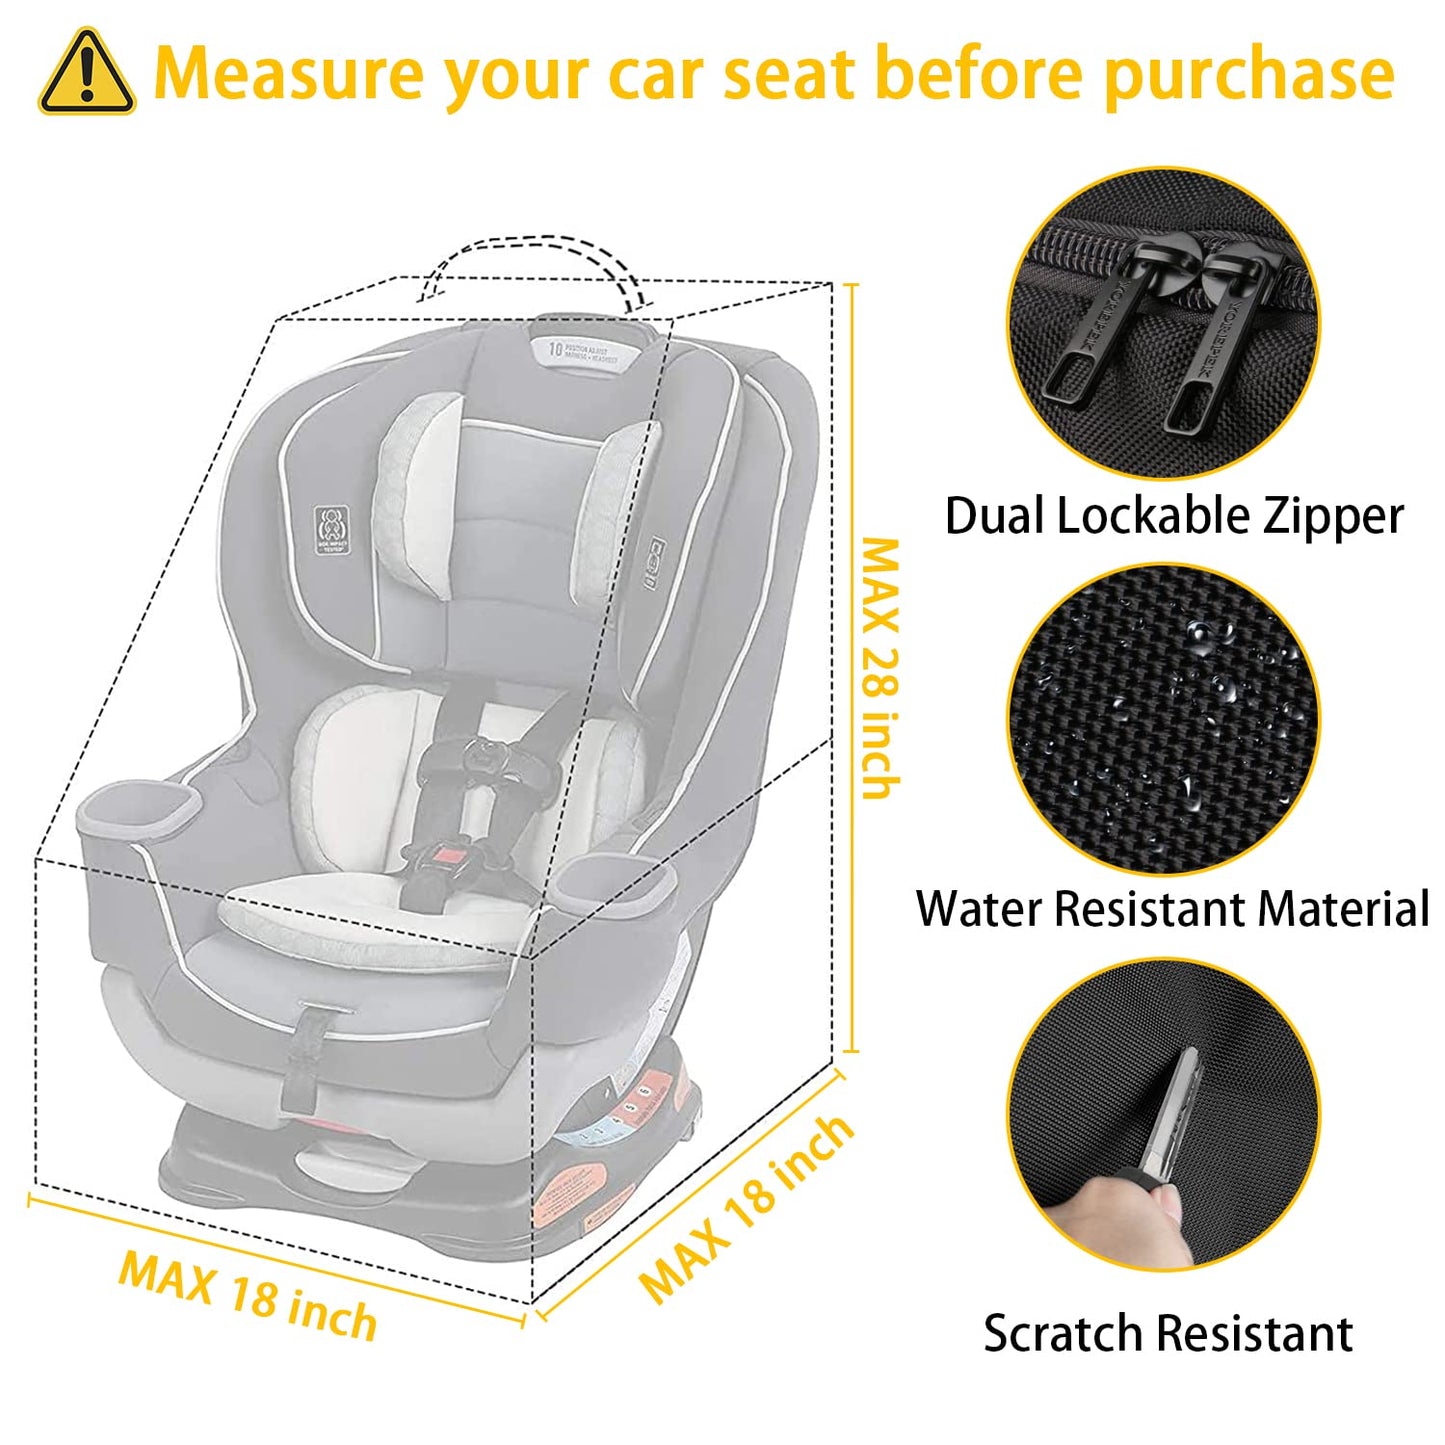 Padded Car Seat Travel Bag Backpack for Airplane, Durable Car Seat Bags for Air Travel